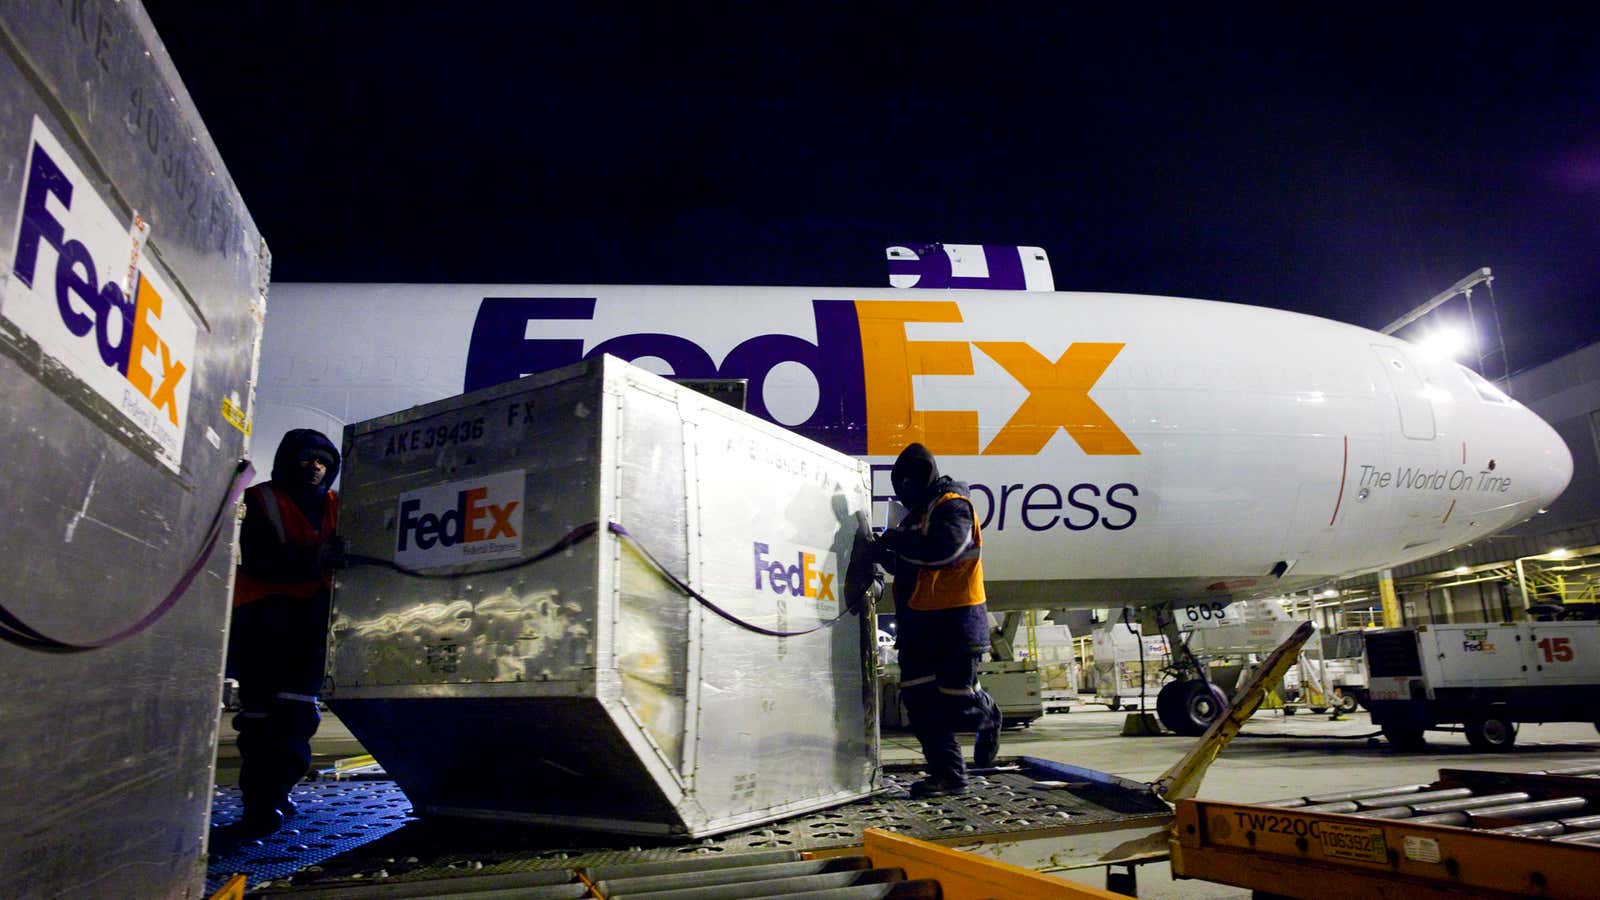 FedEx workers unload one of the company’s cargo planes last year; this year, the firm’s fortunes were bolstered by Apple’s newest iPhone.